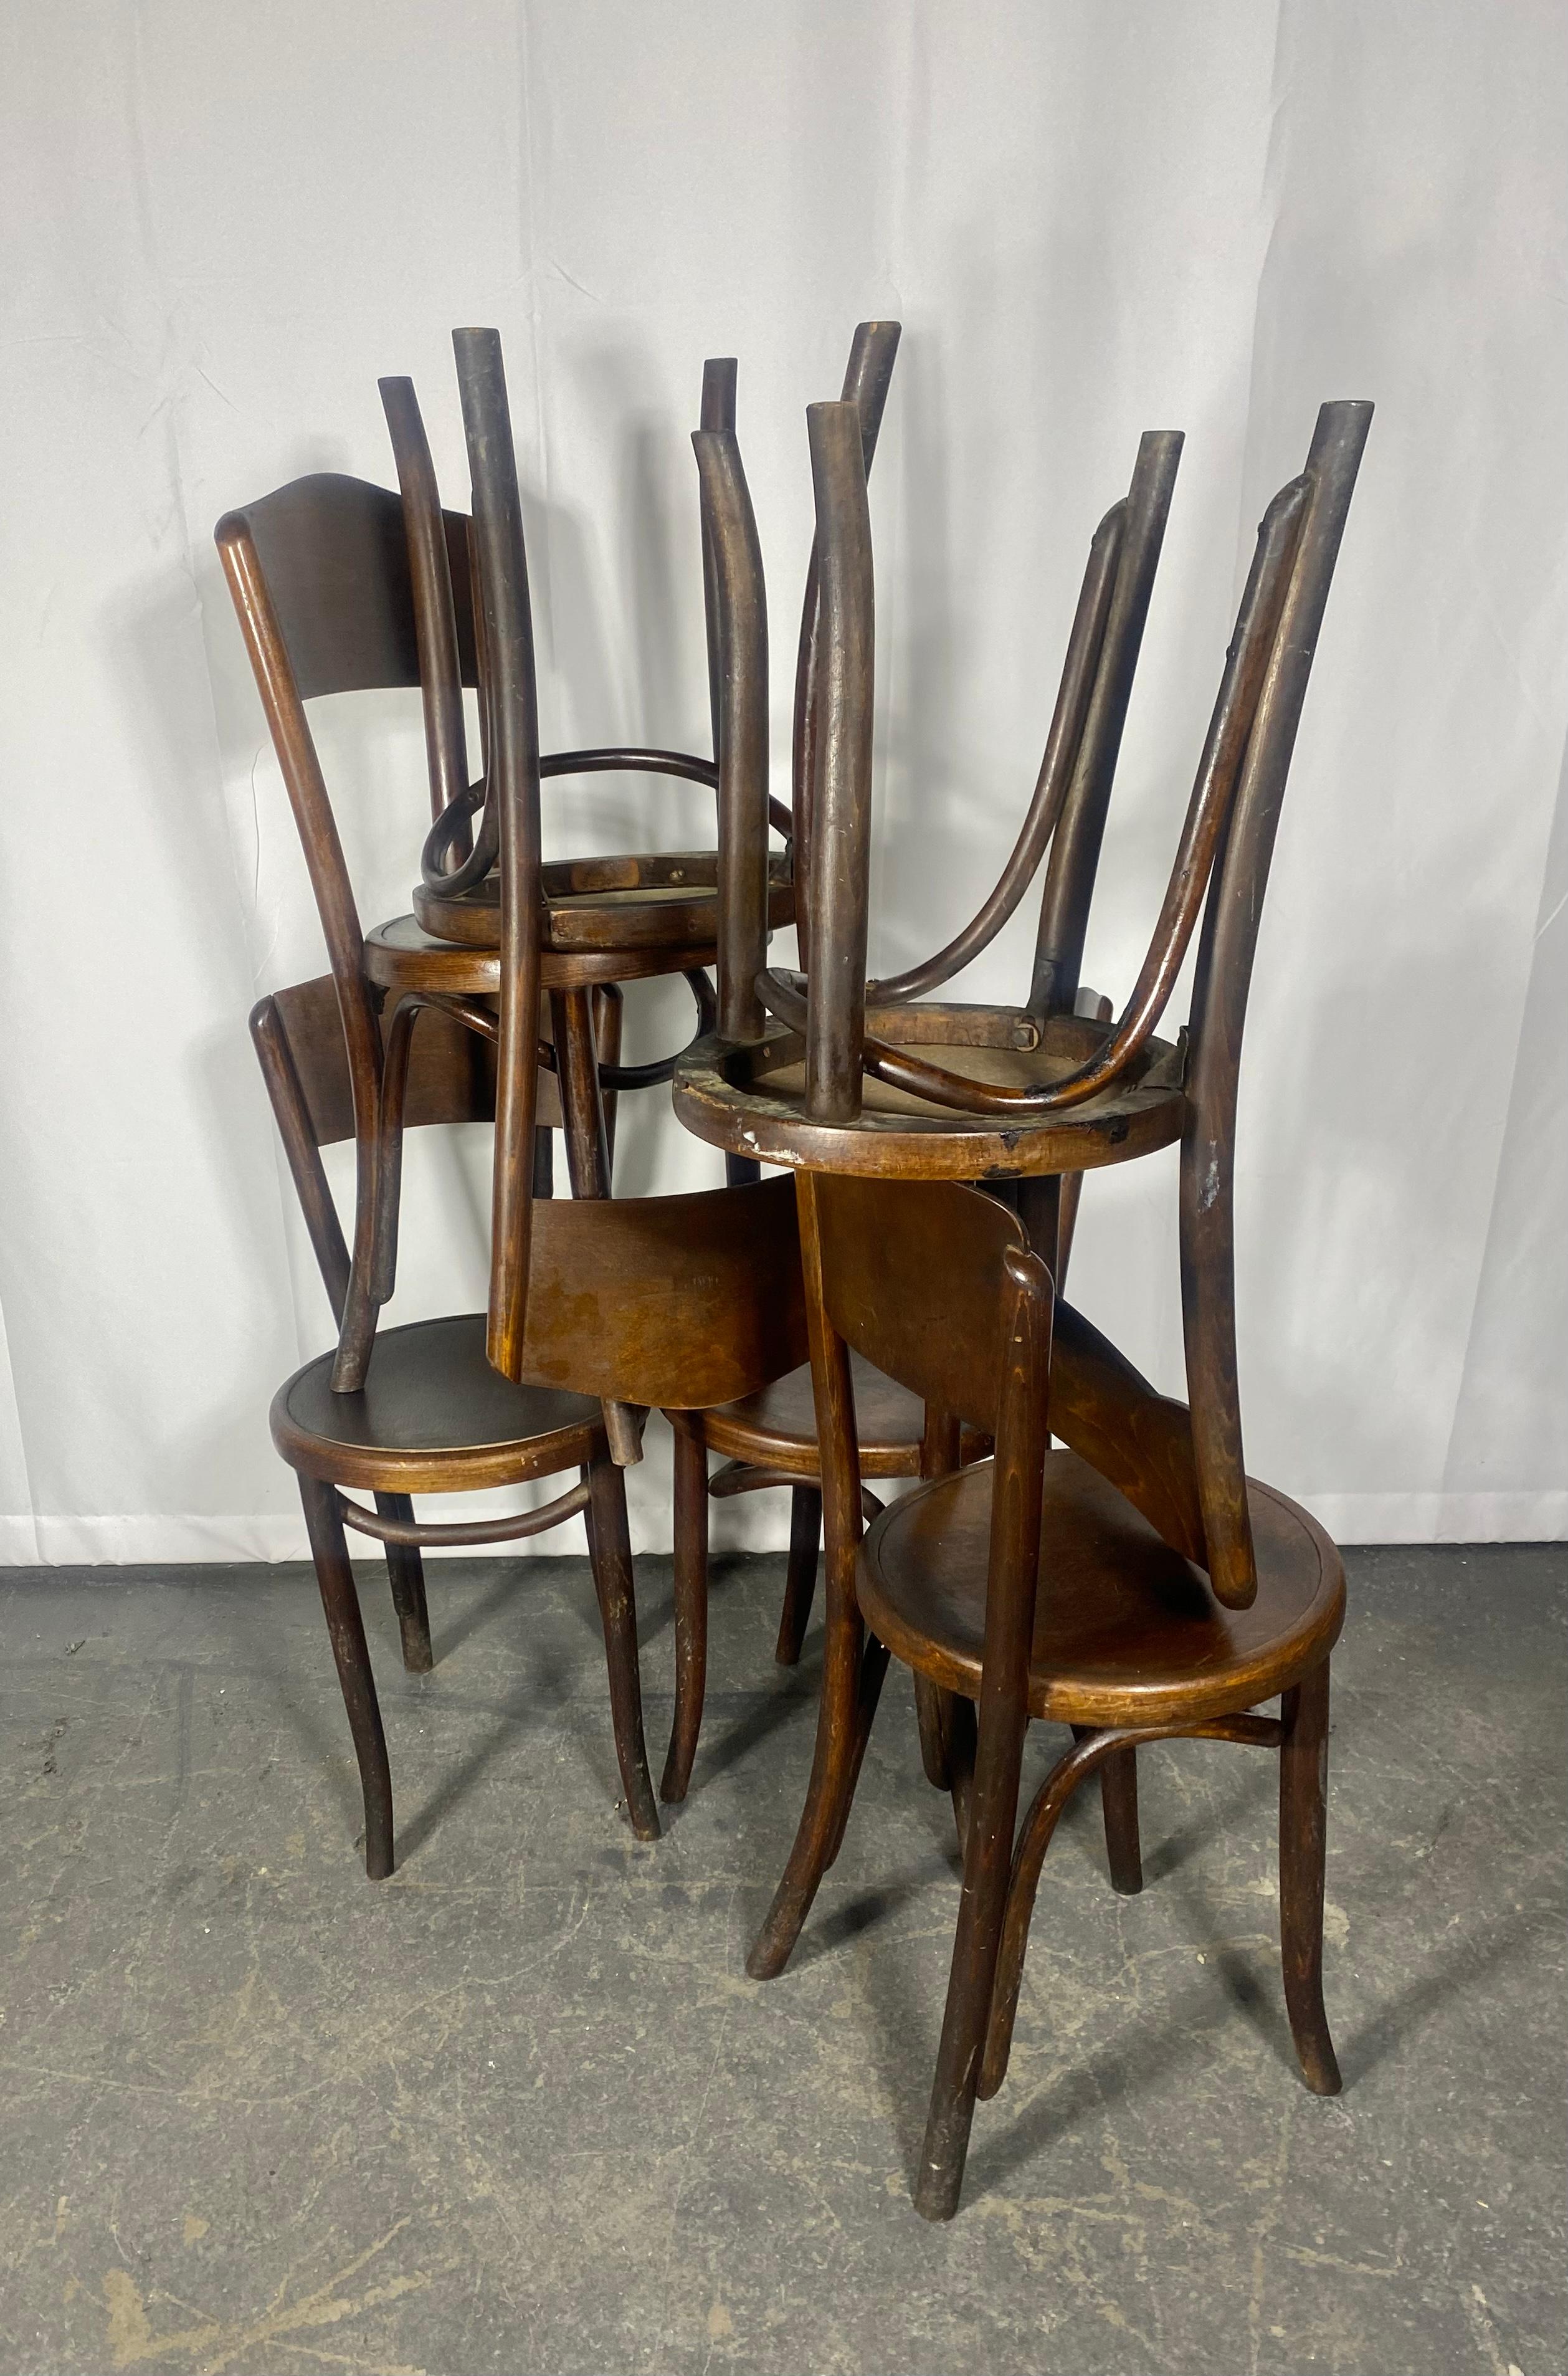  
Set of six Fischel Vienna dining chairs in bentwood with striped pattern on seat and backrest.
These Art Nouveau cafe chairs are model 45 and were made in the Czech Republic in the 1920s. They are labelled with original makers label.
Thonet style.